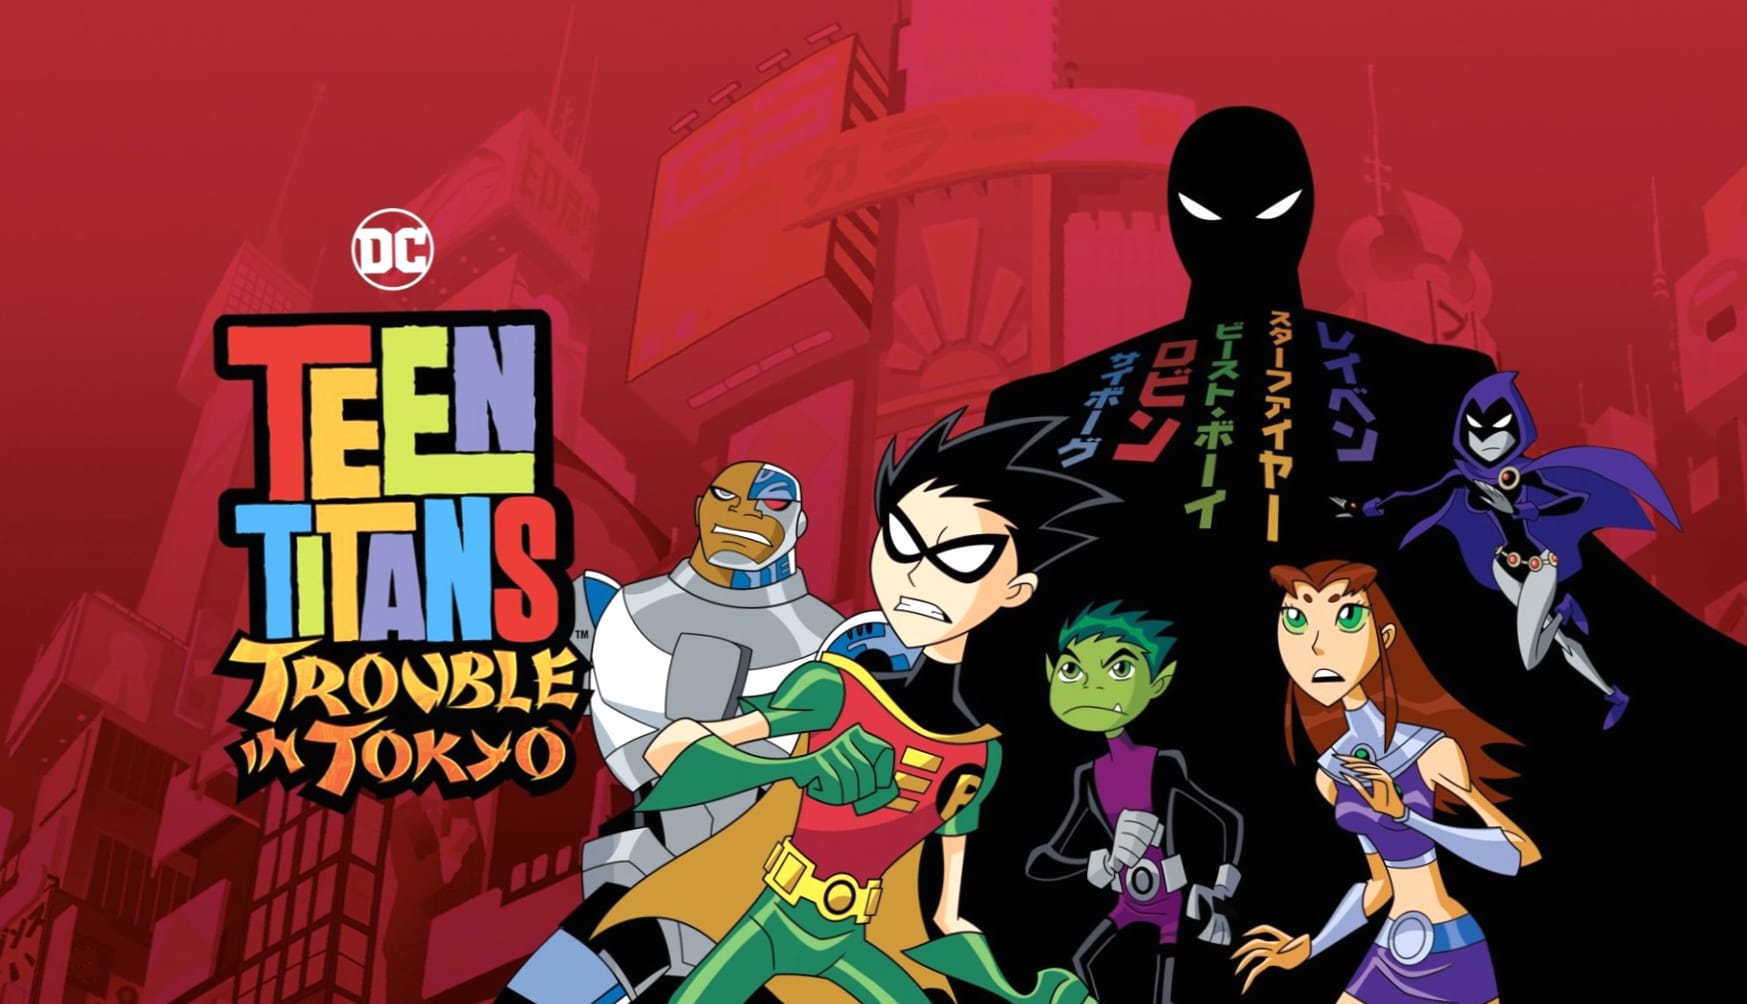 Teen Titans Trouble in Tokyo wallpapers HD quality